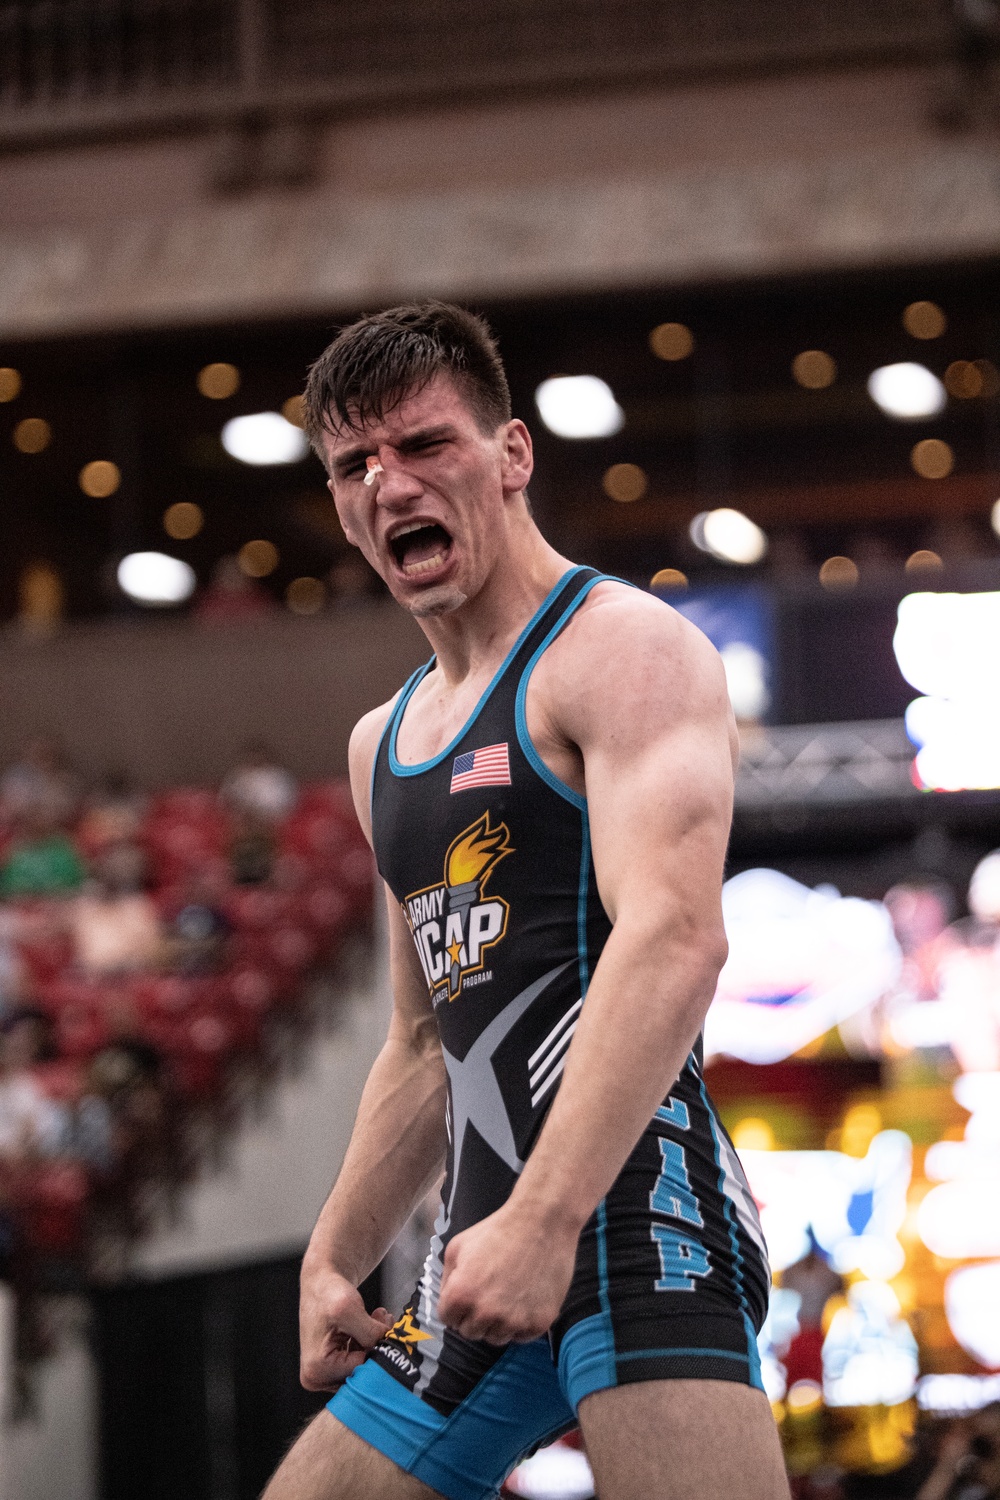 Army WCAP wrestlers stand out at 2023 U.S. Open